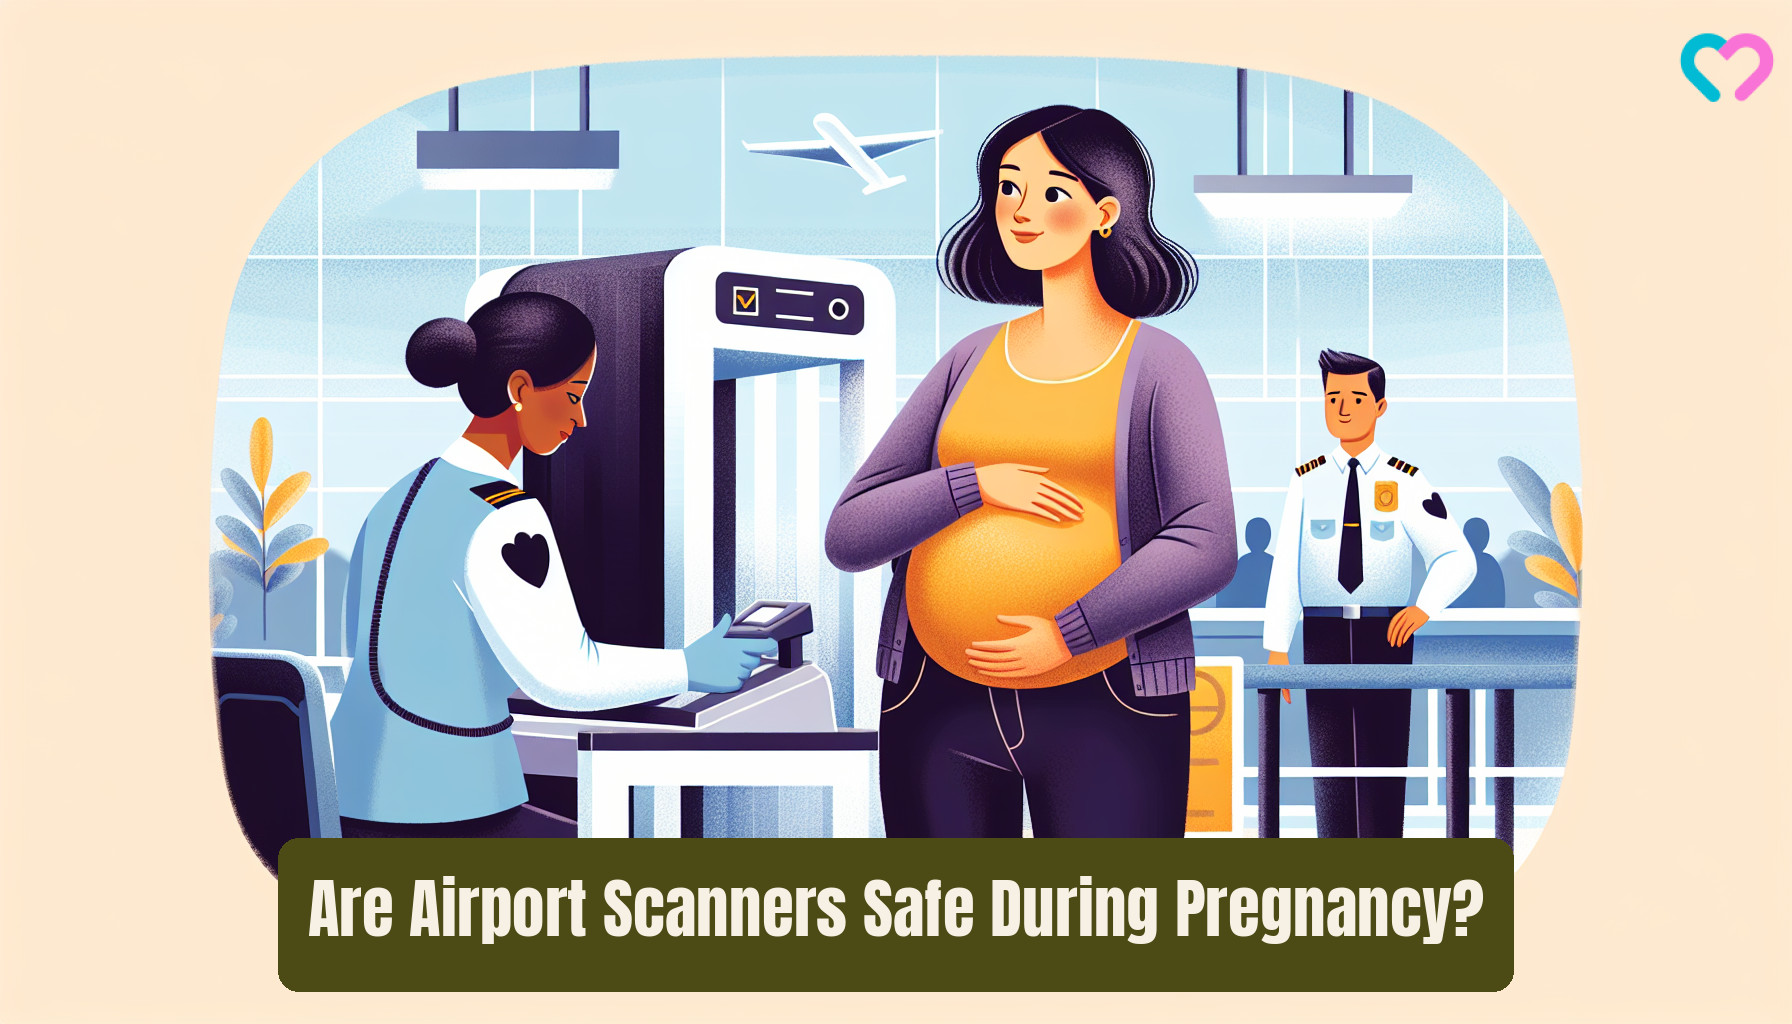 Airport Security Scanners And Pregnancy_illustration